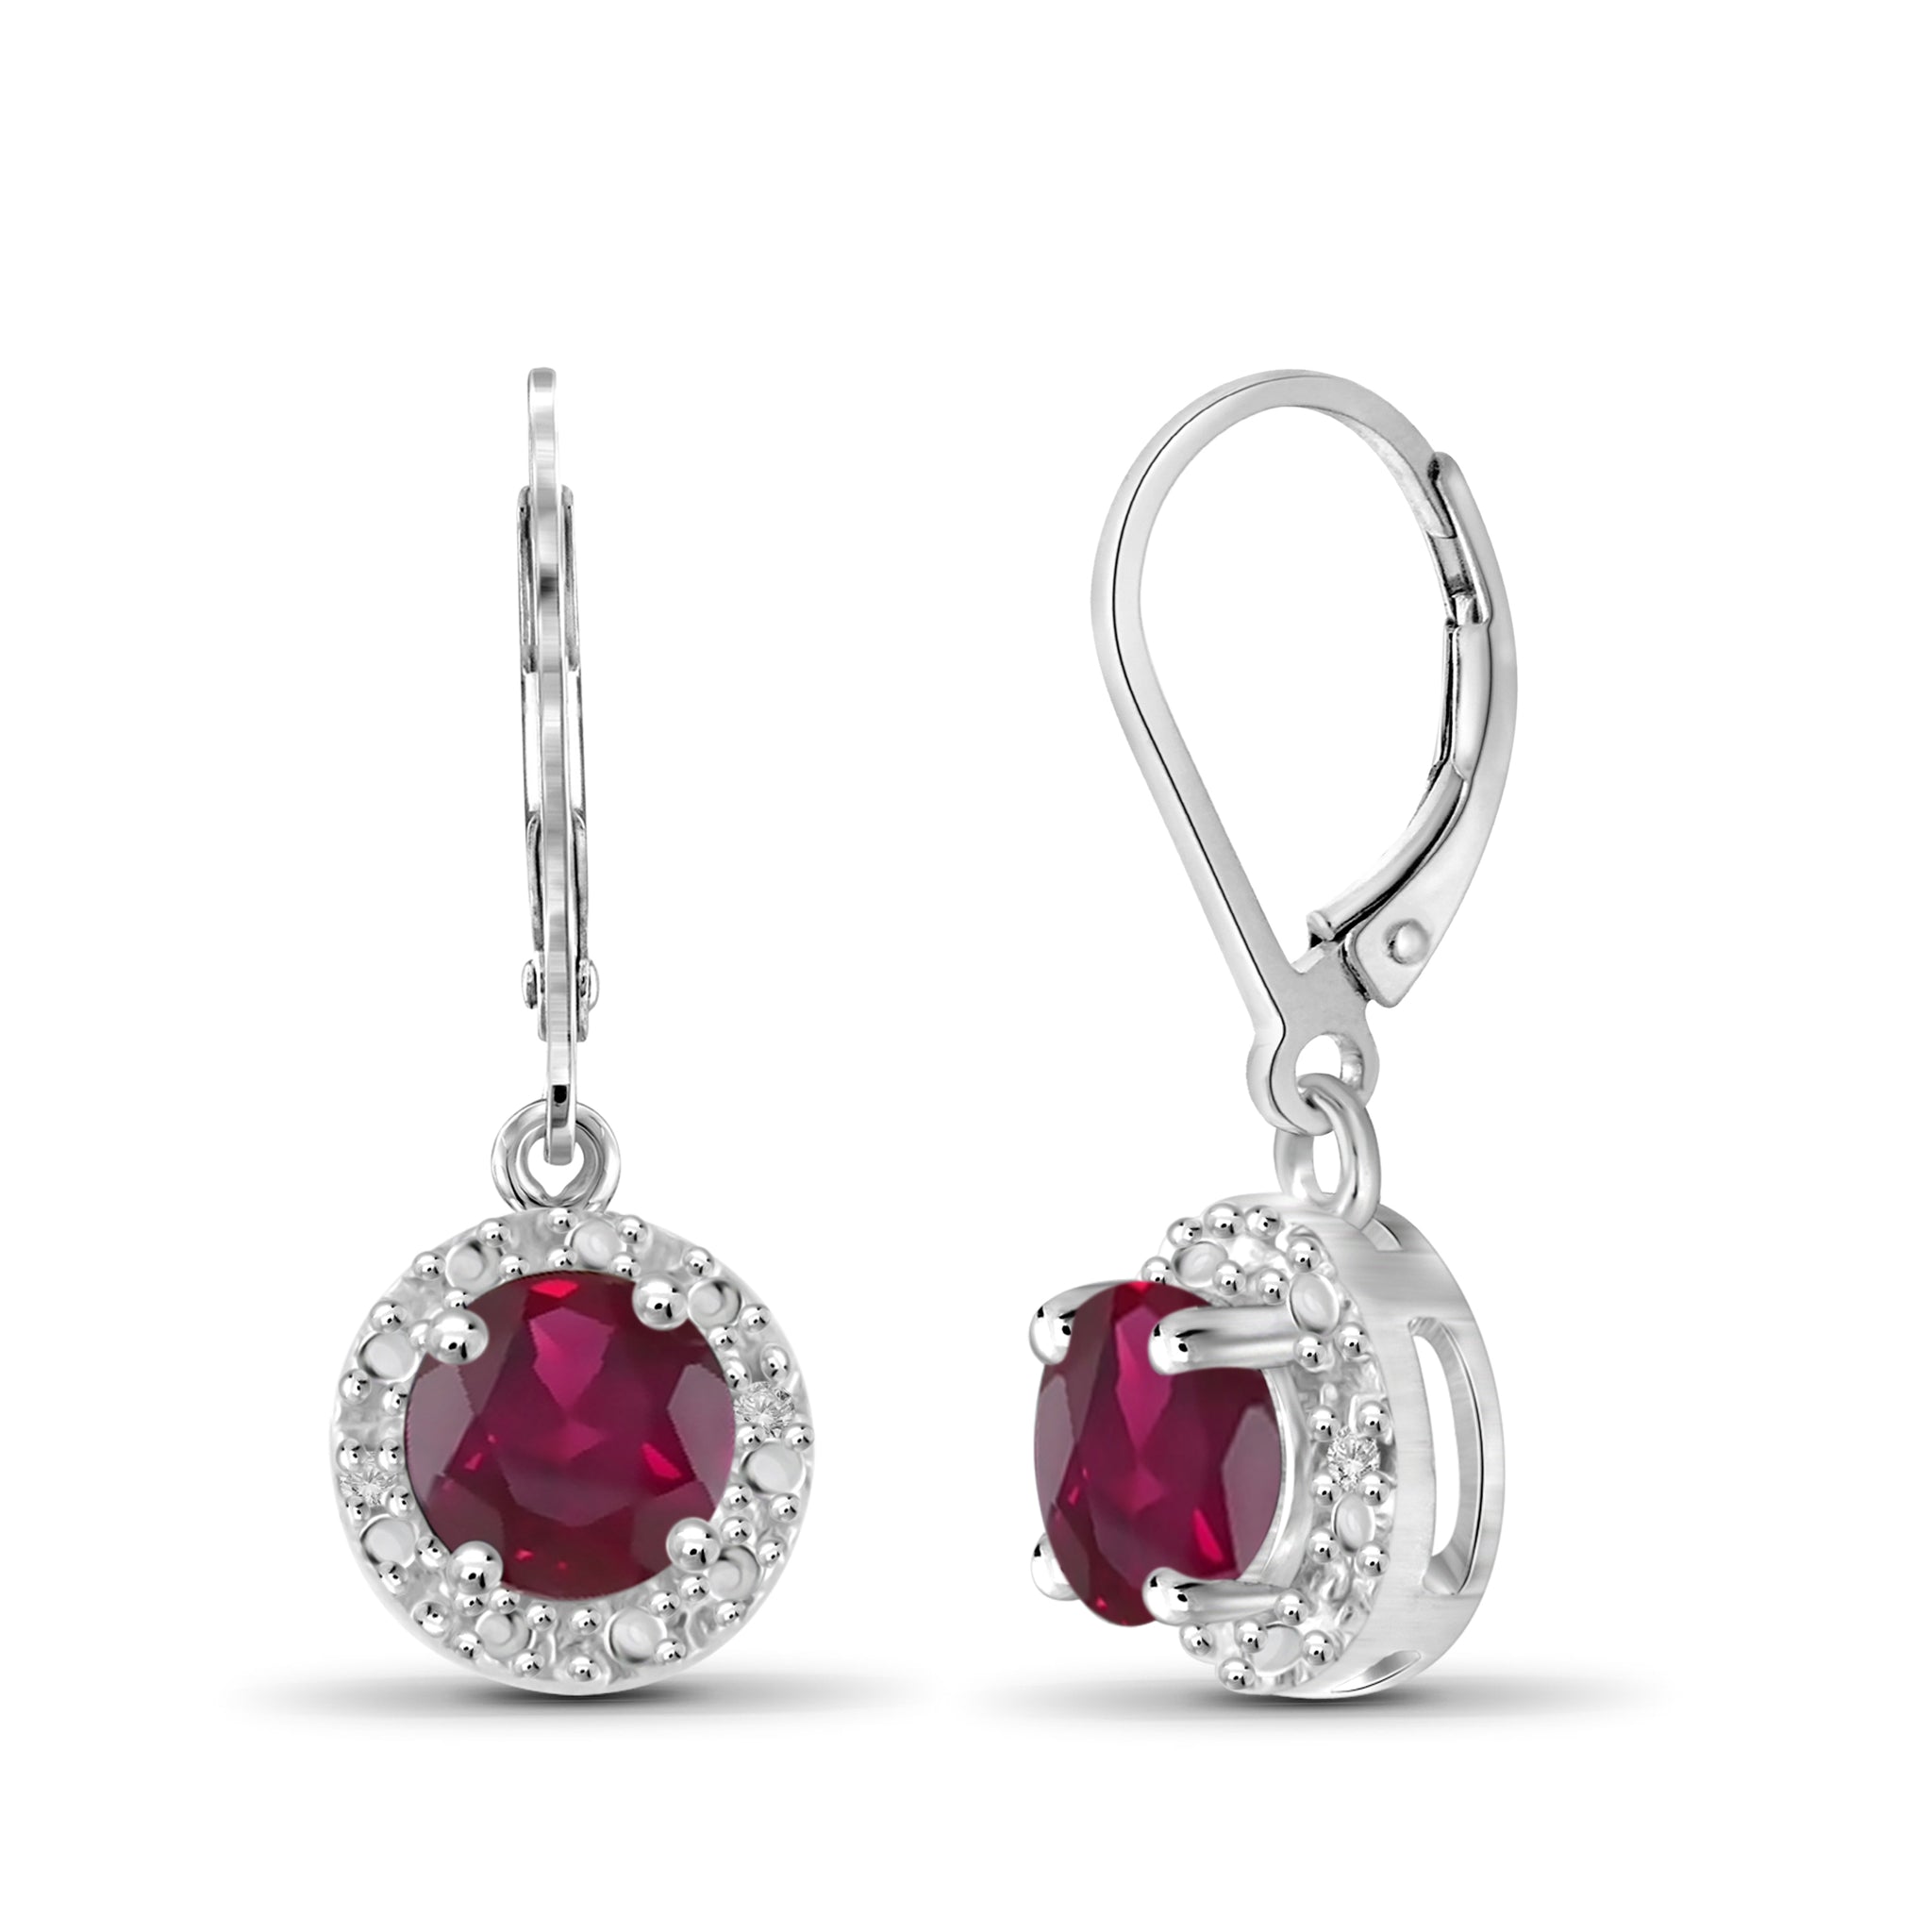 JewelonFire 1 1/3 Carat T.G.W. Ruby and White Diamond Accent Sterling Silver Halo Earrings - Assorted Colors